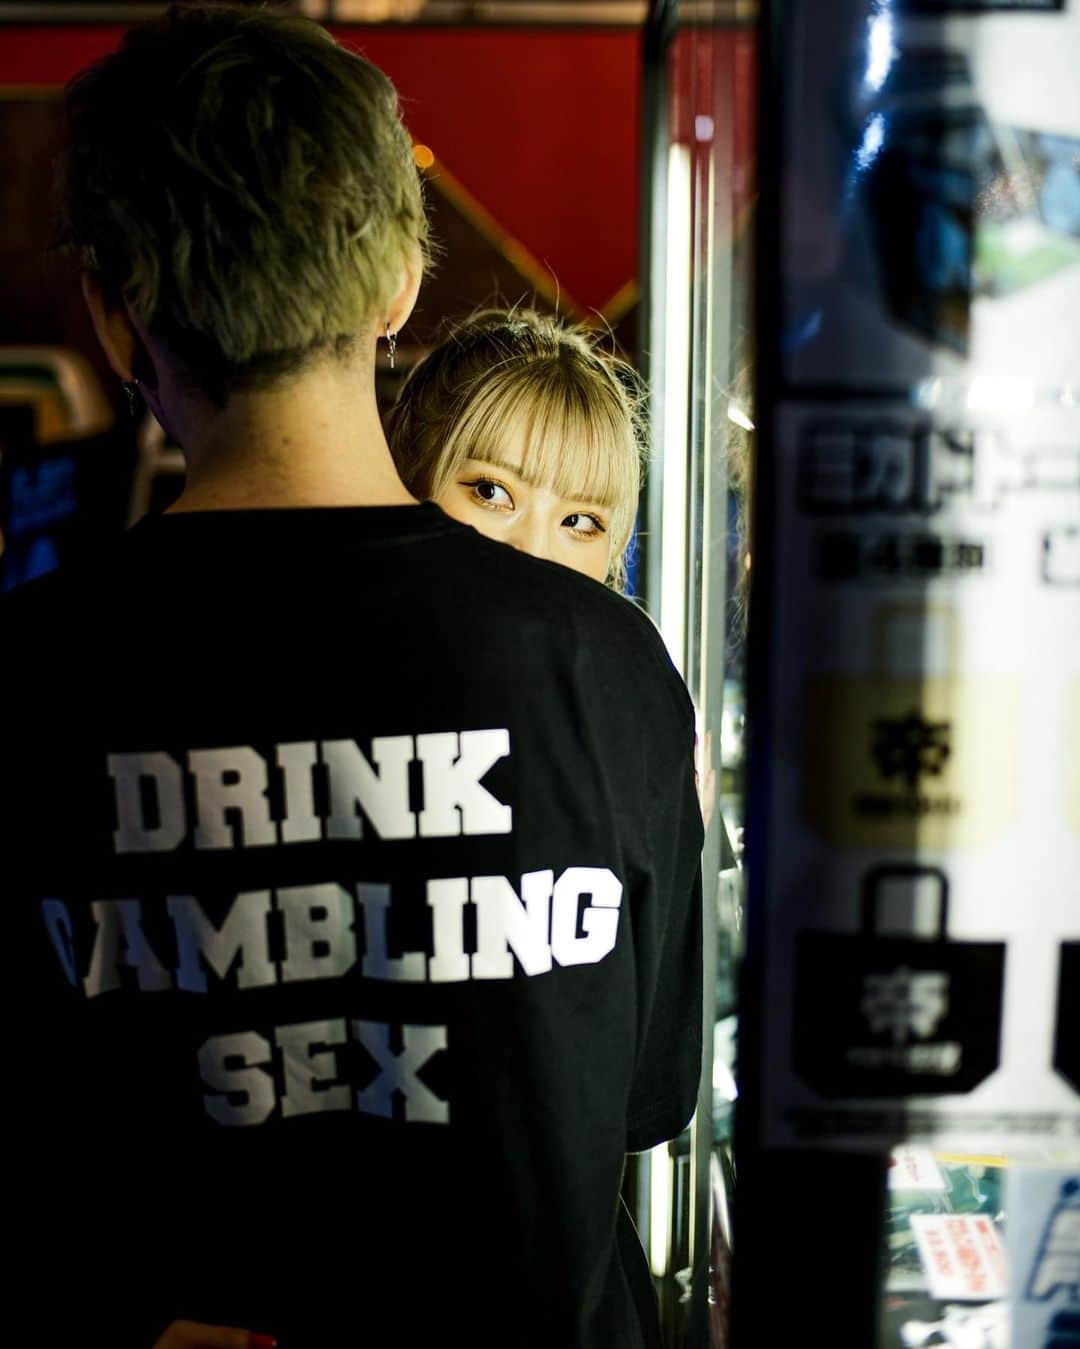 #FR2さんのインスタグラム写真 - (#FR2Instagram)「Collaboration items incorporating an UNCOOL IS COOL concept from #FR2 and made together with PUNK DRUNKERS will go on sale from Saturday, December 12th. Starting with shirts that feature PUNK DRUNKERS unmistakable "aitsu" character paired with #FR2's signature "Smoker's" design, a total of seven items will be released, including hoodies, long sleeve T-shirts, short sleeve T-shirts, and caps, as well as items that can be matched.   #FR2 はUNCOOL IS COOL【ダサイはカッコイー】をコンセプトに掲げる「PUNK DRUNKERS」とのコラボレーション商品を12月12日(土)から発売します。「PUNK DRUNKERS」の象徴ともいえる“あいつ”を、＃FR2 の代表デザインである「Smoker's」に落とし込んだTシャツをはじめ、セットアップでも着用できるアイテムやフーディー・ロンTとキャップの計7型をリリースいたします。    #FR2 與以「UNCOOL IS COOL」（俗就是酷）作為概念的「PUNK DRUNKERS」推出的聯名商品將於 12 月 12 日（六）開始販售。將可說是「PUNK DRUNKERS」靈魂象徵的「那傢伙」（AITSU）帶入 #FR2 的代名詞「Smoker's」的設計，以該款設計圖案的T恤為主，會推出可成套穿著的服飾及帽T、長袖T恤、T恤、棒球帽共七款商品。   #FR2 将UNCOOL IS COOL【土就是潮】作为理念与“PUNK DRUNKERS”合作推出的商品将于12月12日（周六）发售。  其中包括将可以说是“PUNK DRUNKERS”象征的“那个人”融入＃FR2 的代名词“Smoker's”设计而成的T恤、成套穿搭也可以搭配的单品、帽衫长T、帽子等7款新品。  #FPDR2#FR2#punkdrunkers」12月10日 20時47分 - fxxkingrabbits